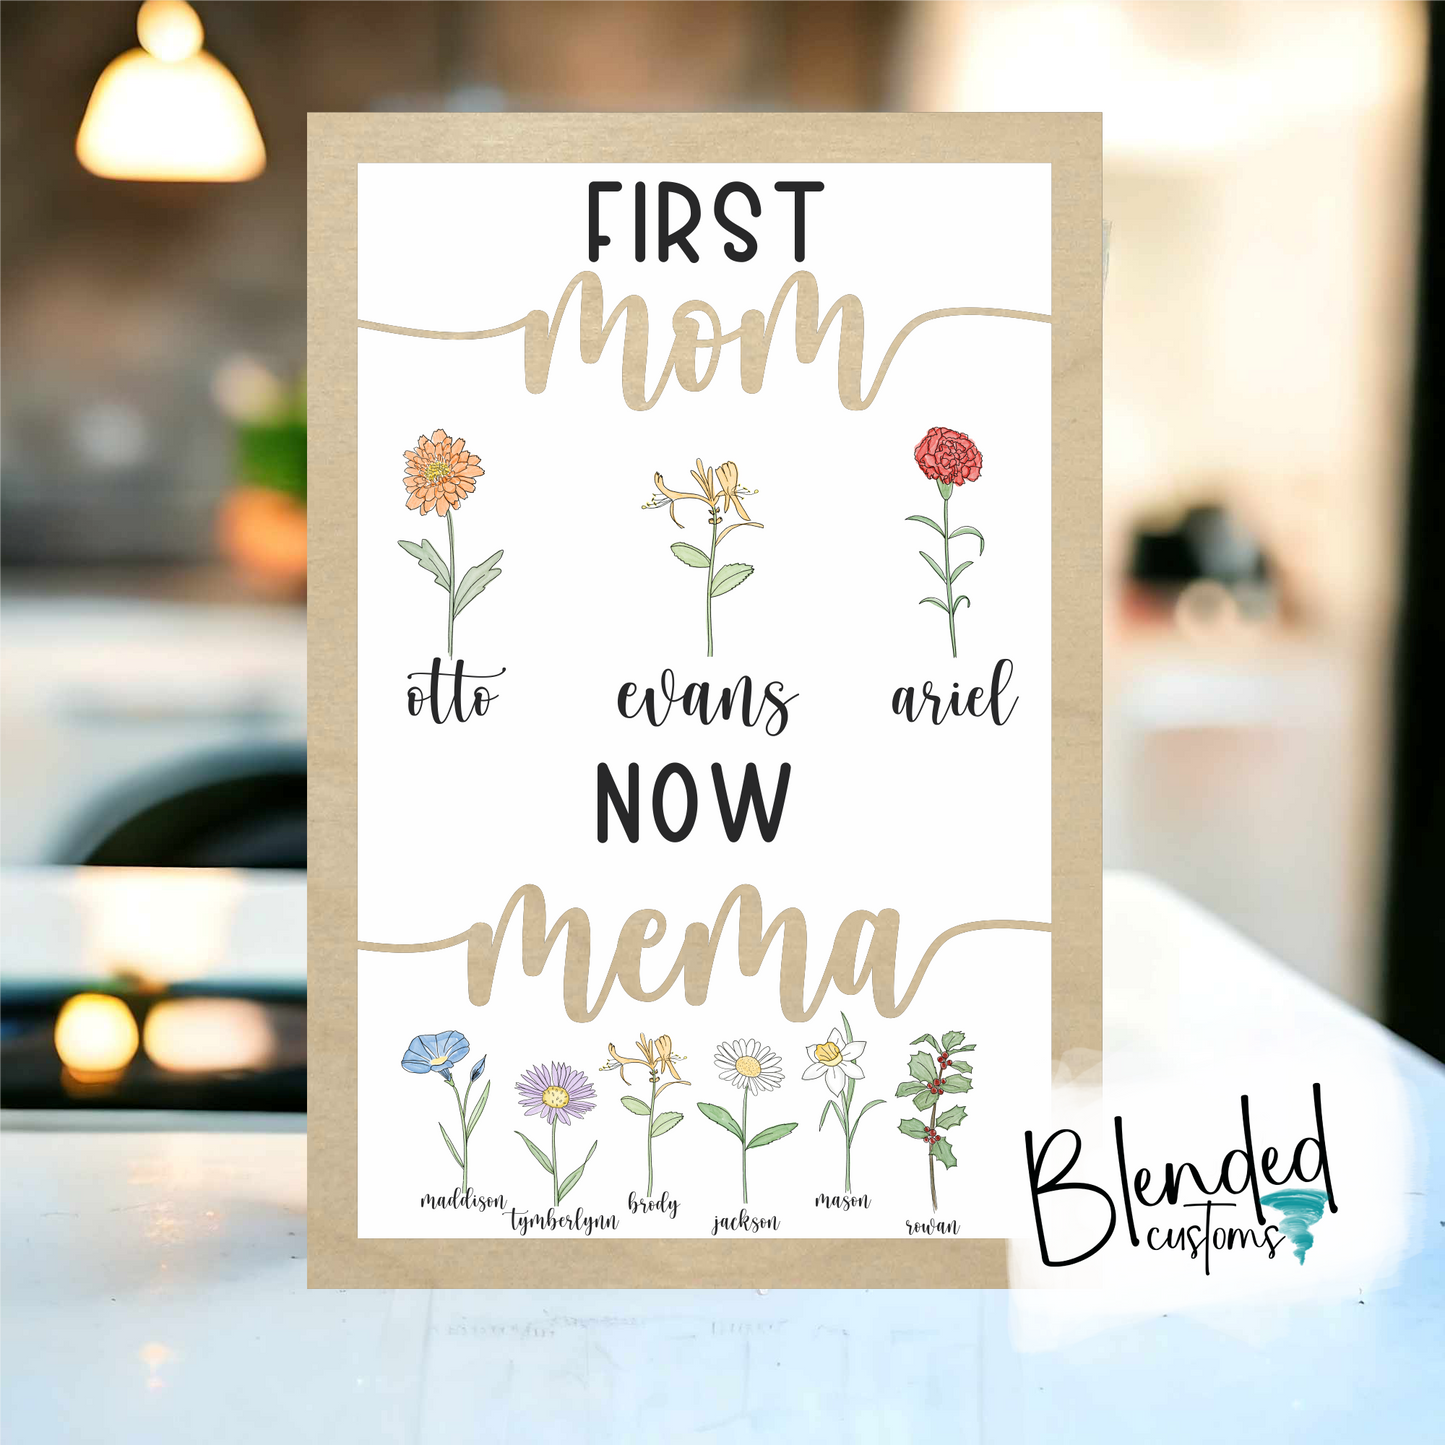 First Mom, Then "Personalized Name" Sublimation Blank with Wood Frame